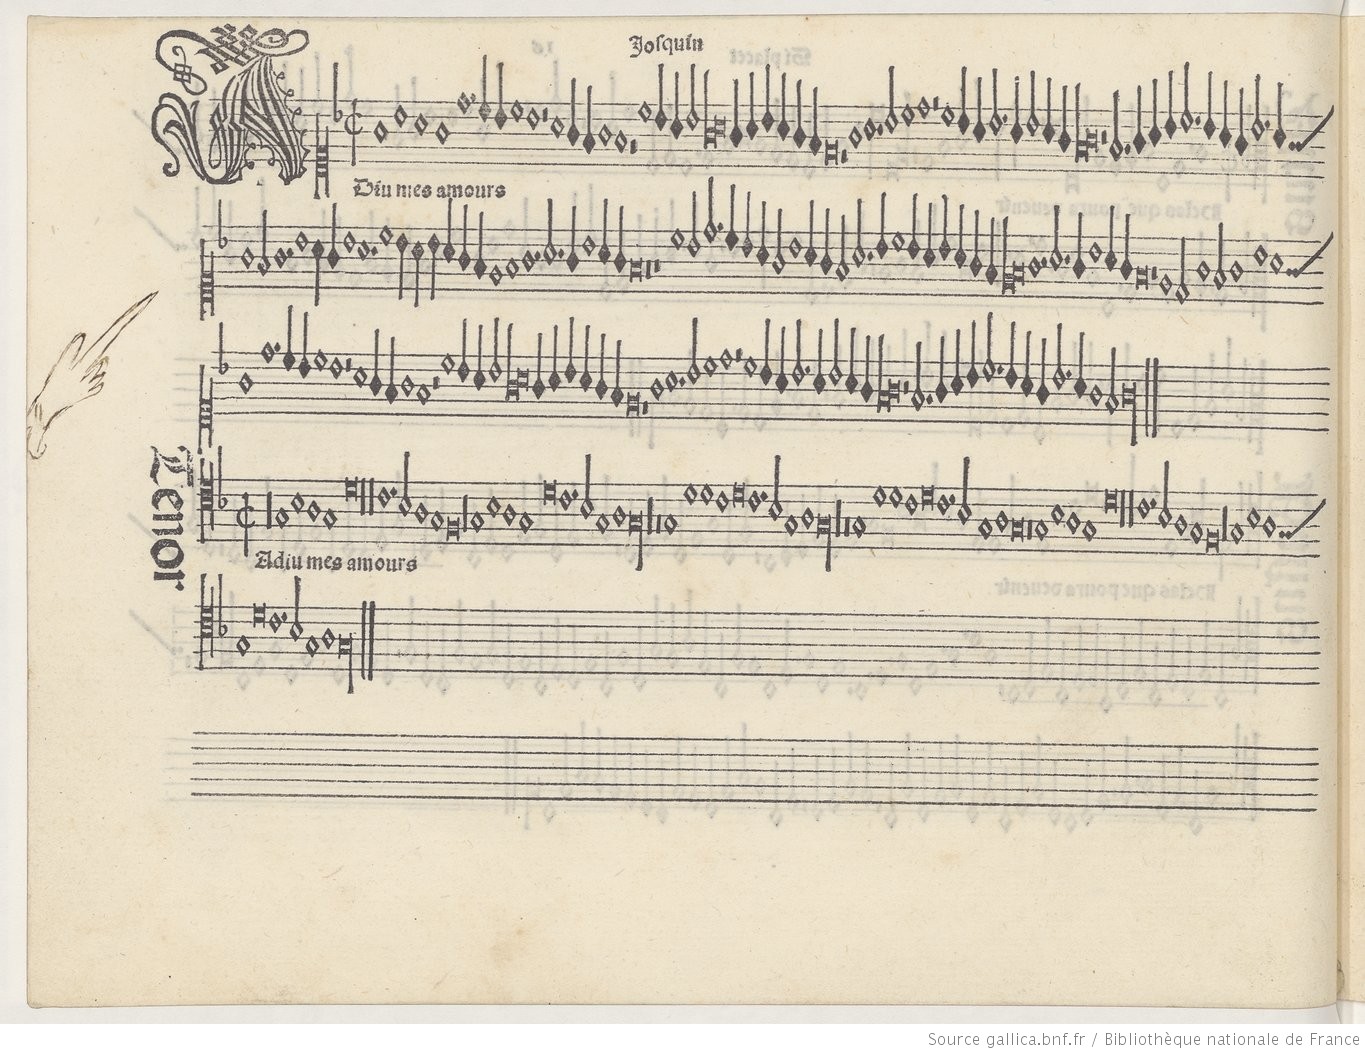 A page from one of the first printed sheet music books, the Harmonice Musices Odhecaton.